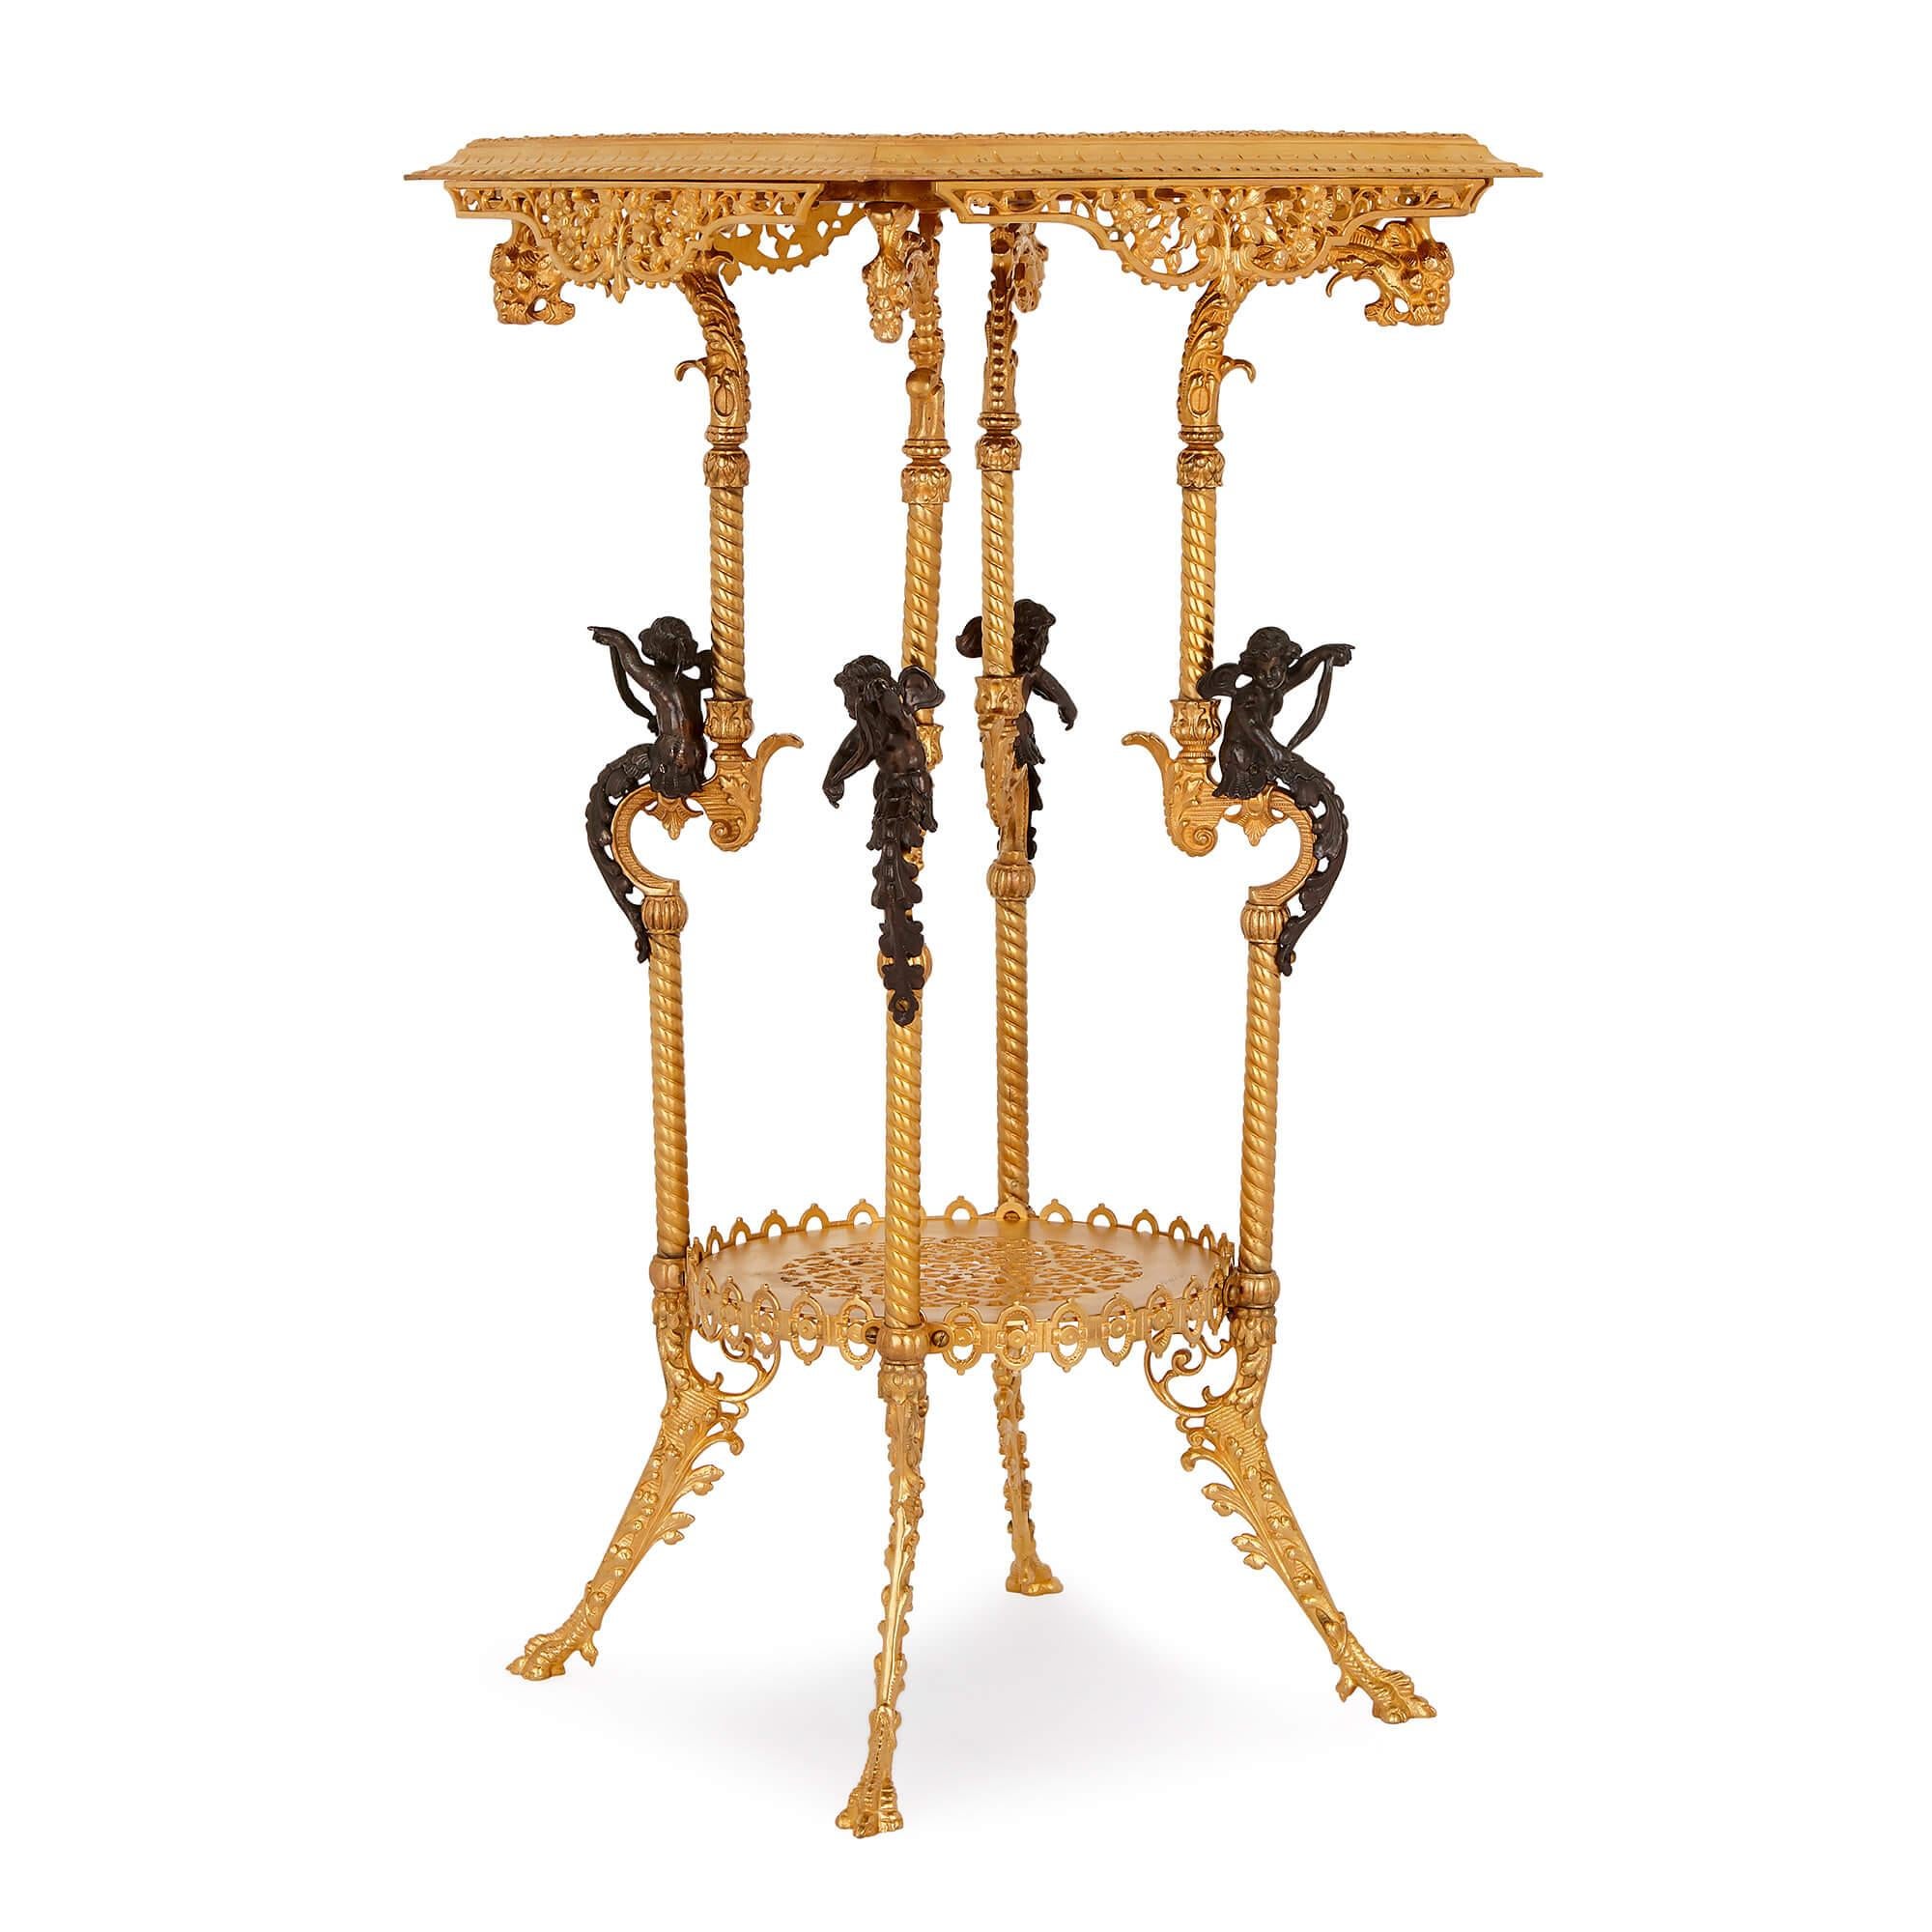 This exquisite table is composed of a malachite top supported on four gilt bronze legs, with a lower shelf. It was crafted in France in the early 20th century, and is an eclectic combination of classical and Chinoiserie stylistic features. 

Set